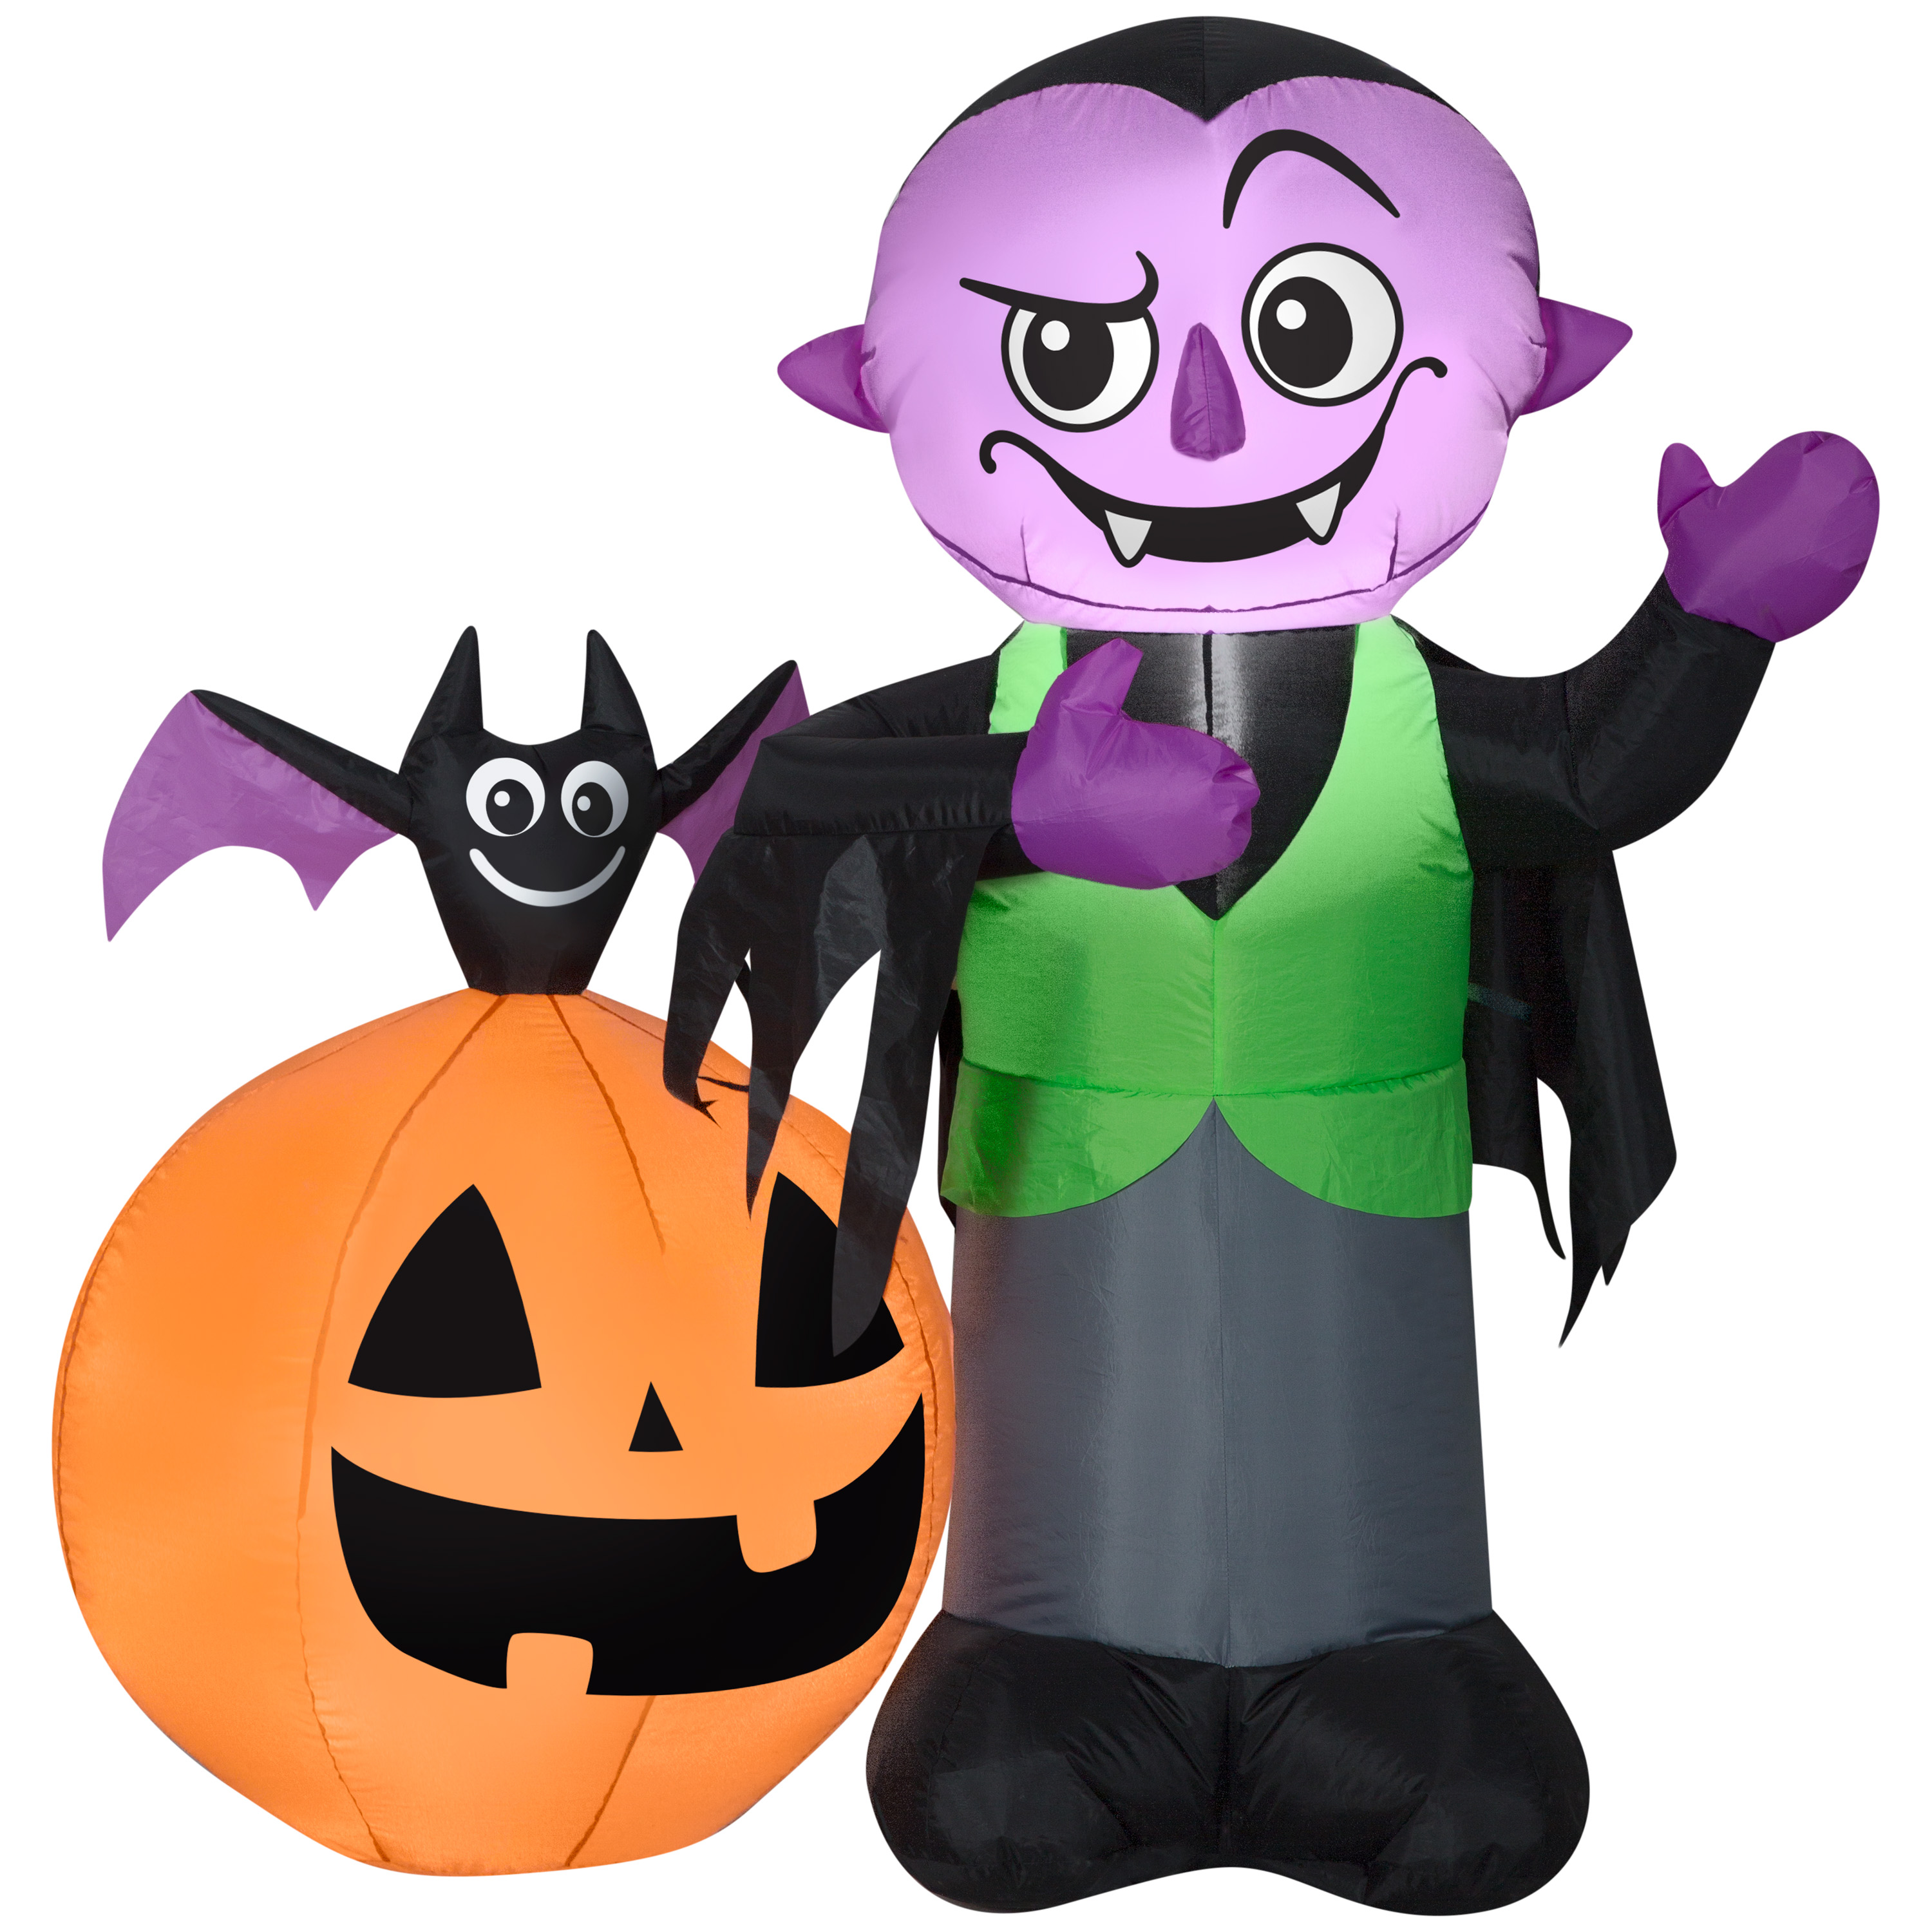 Halloween Airblown Inflatable Vampire, Bat, and Jack O Lantern Scene by Gemmy Industries - image 1 of 2